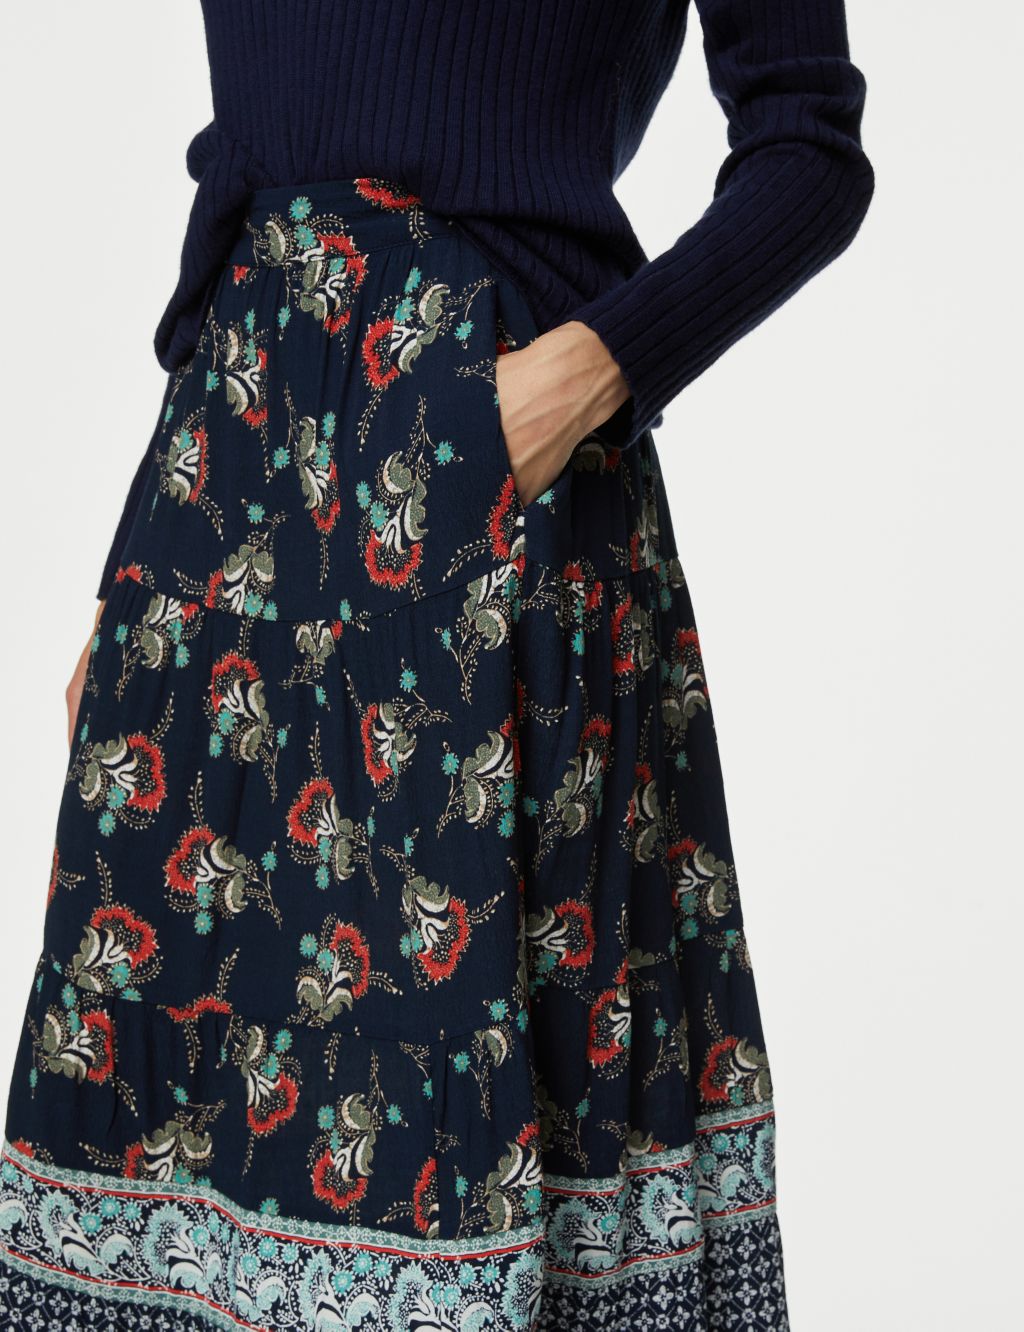 Floral Midaxi Tiered Skirt image 4